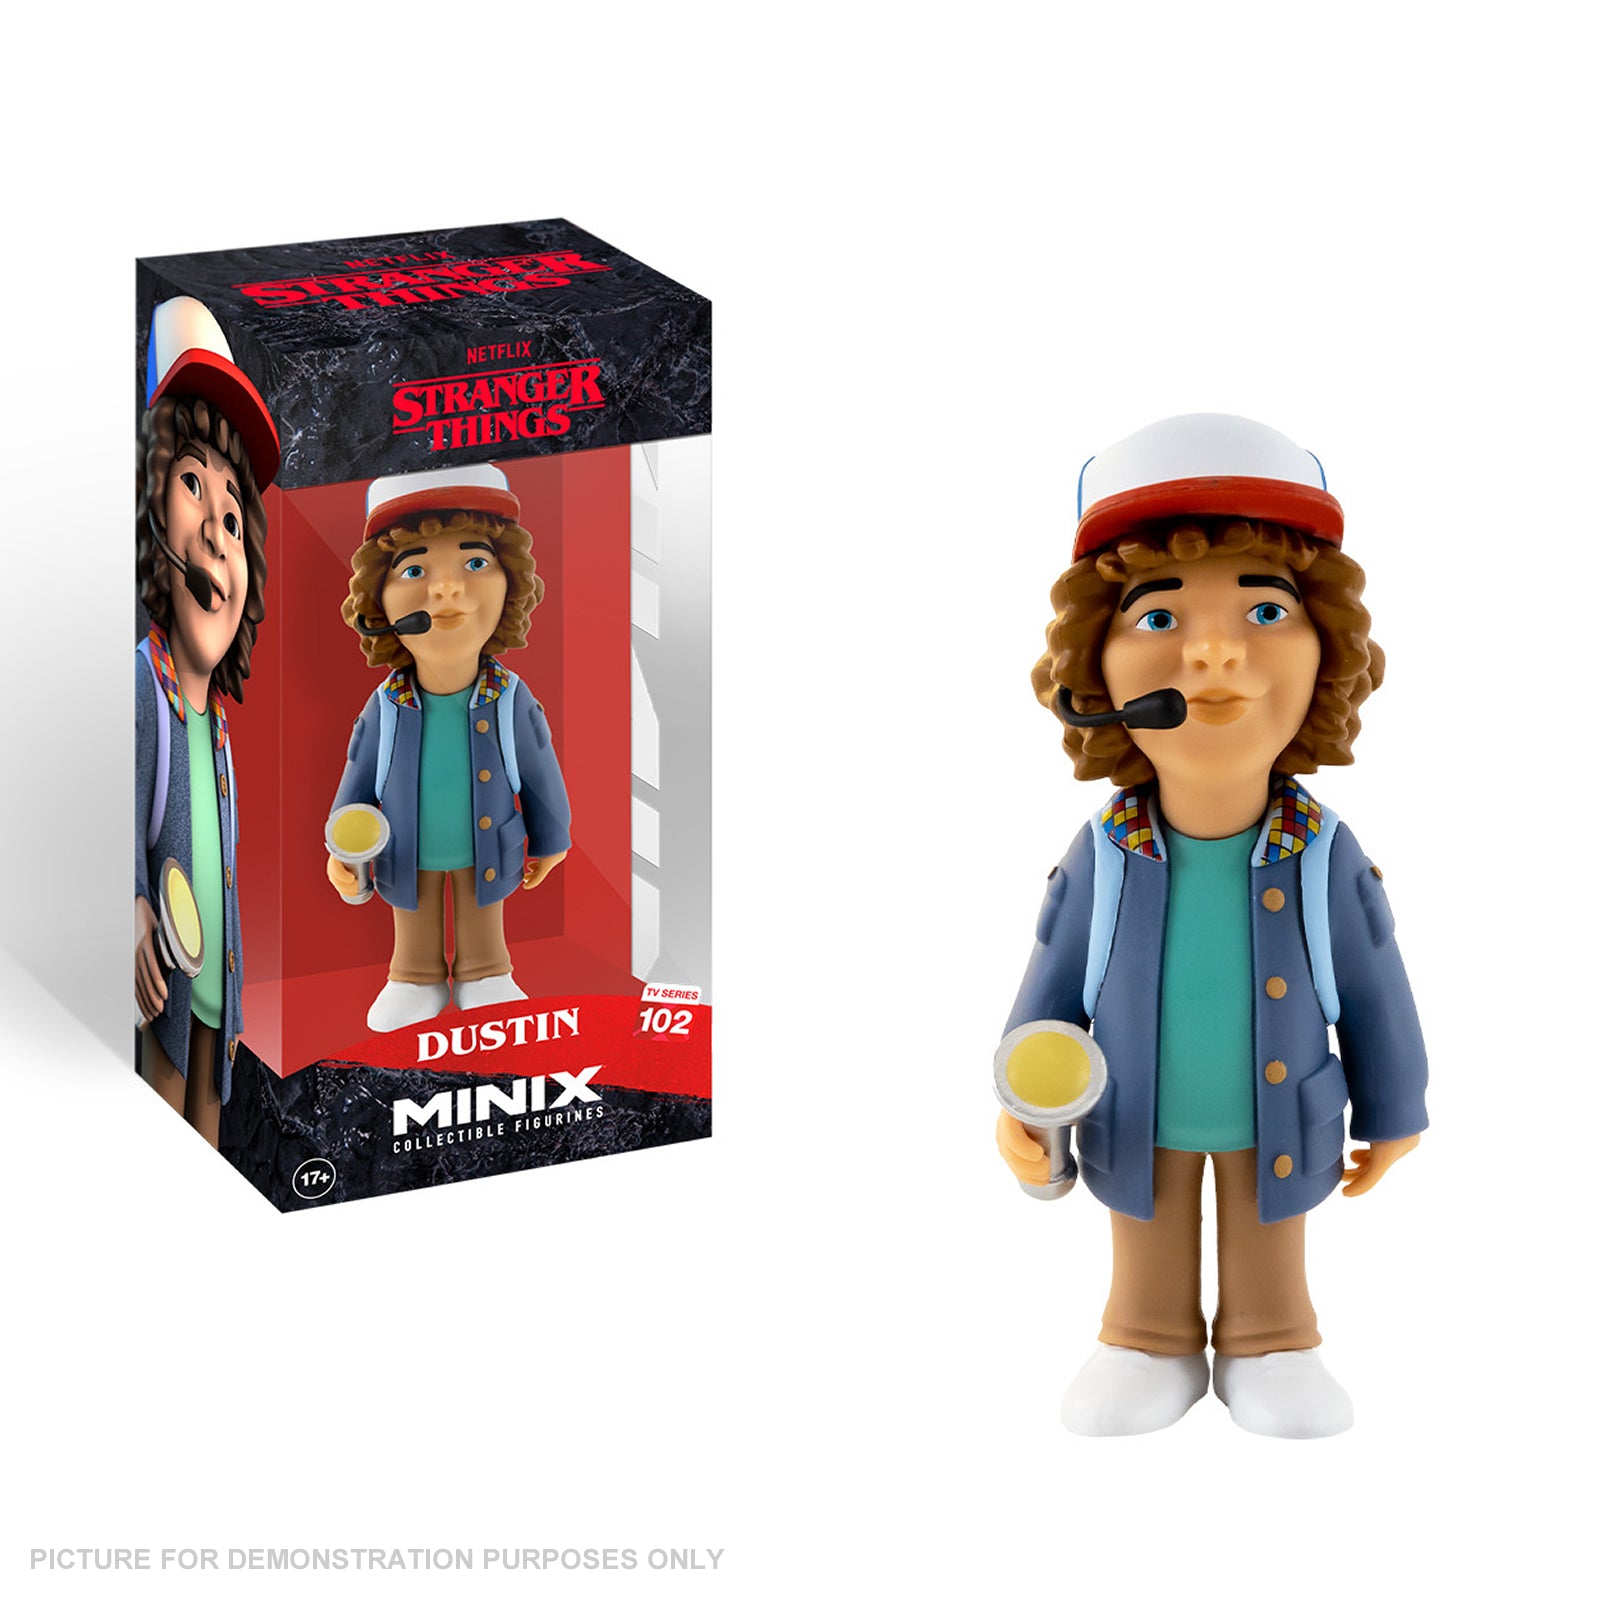 MINIX Collectable Figurine - DUSTIN - Stranger Things